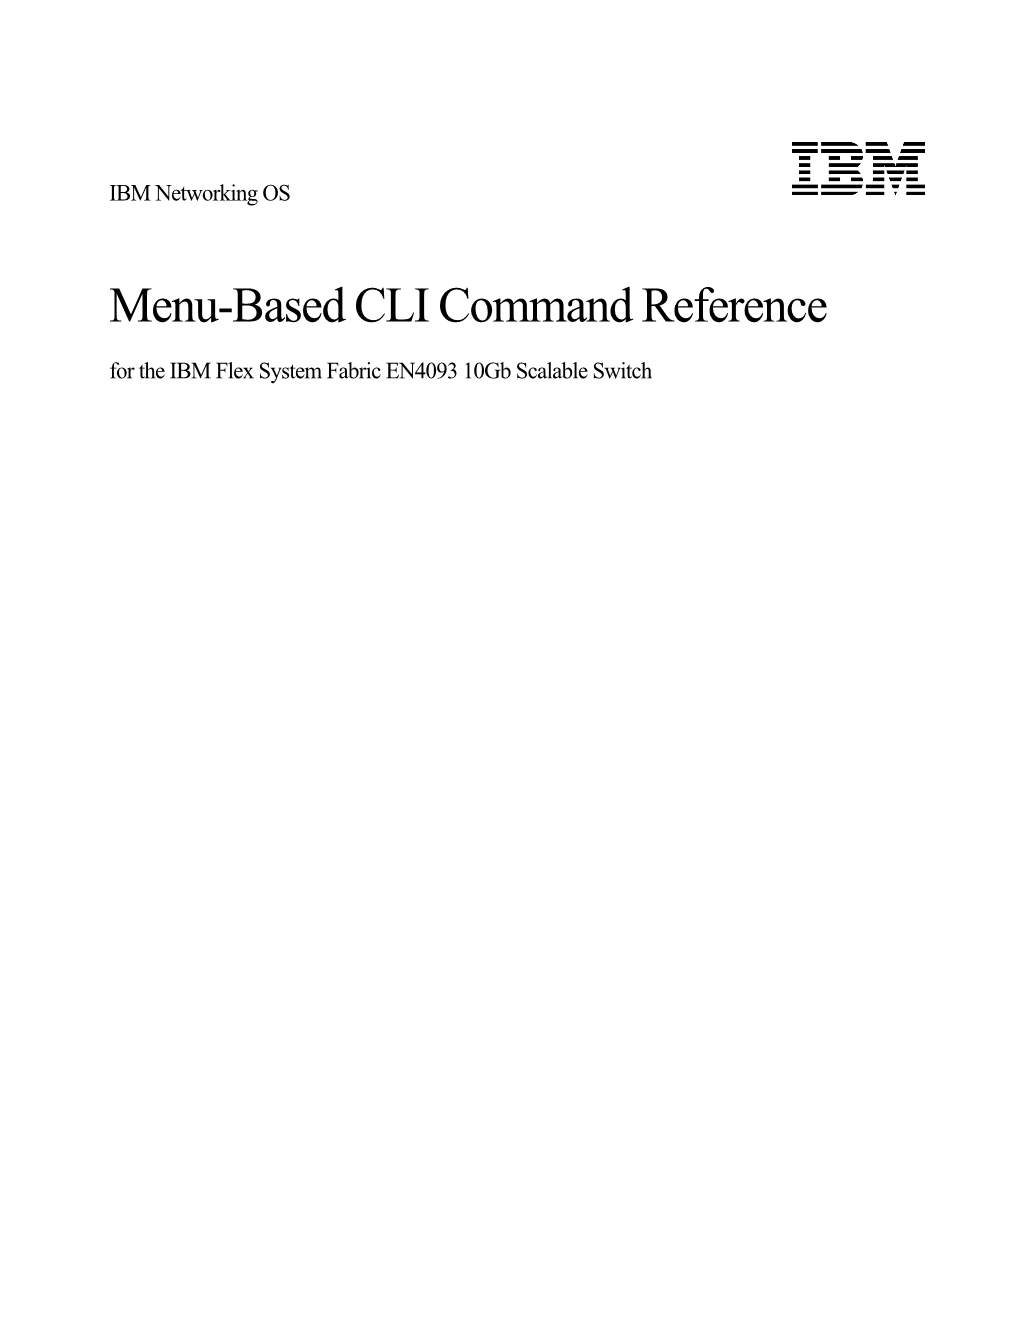 Menu-Based CLI Command Reference for the IBM Flex System Fabric EN4093 10Gb Scalable Switch